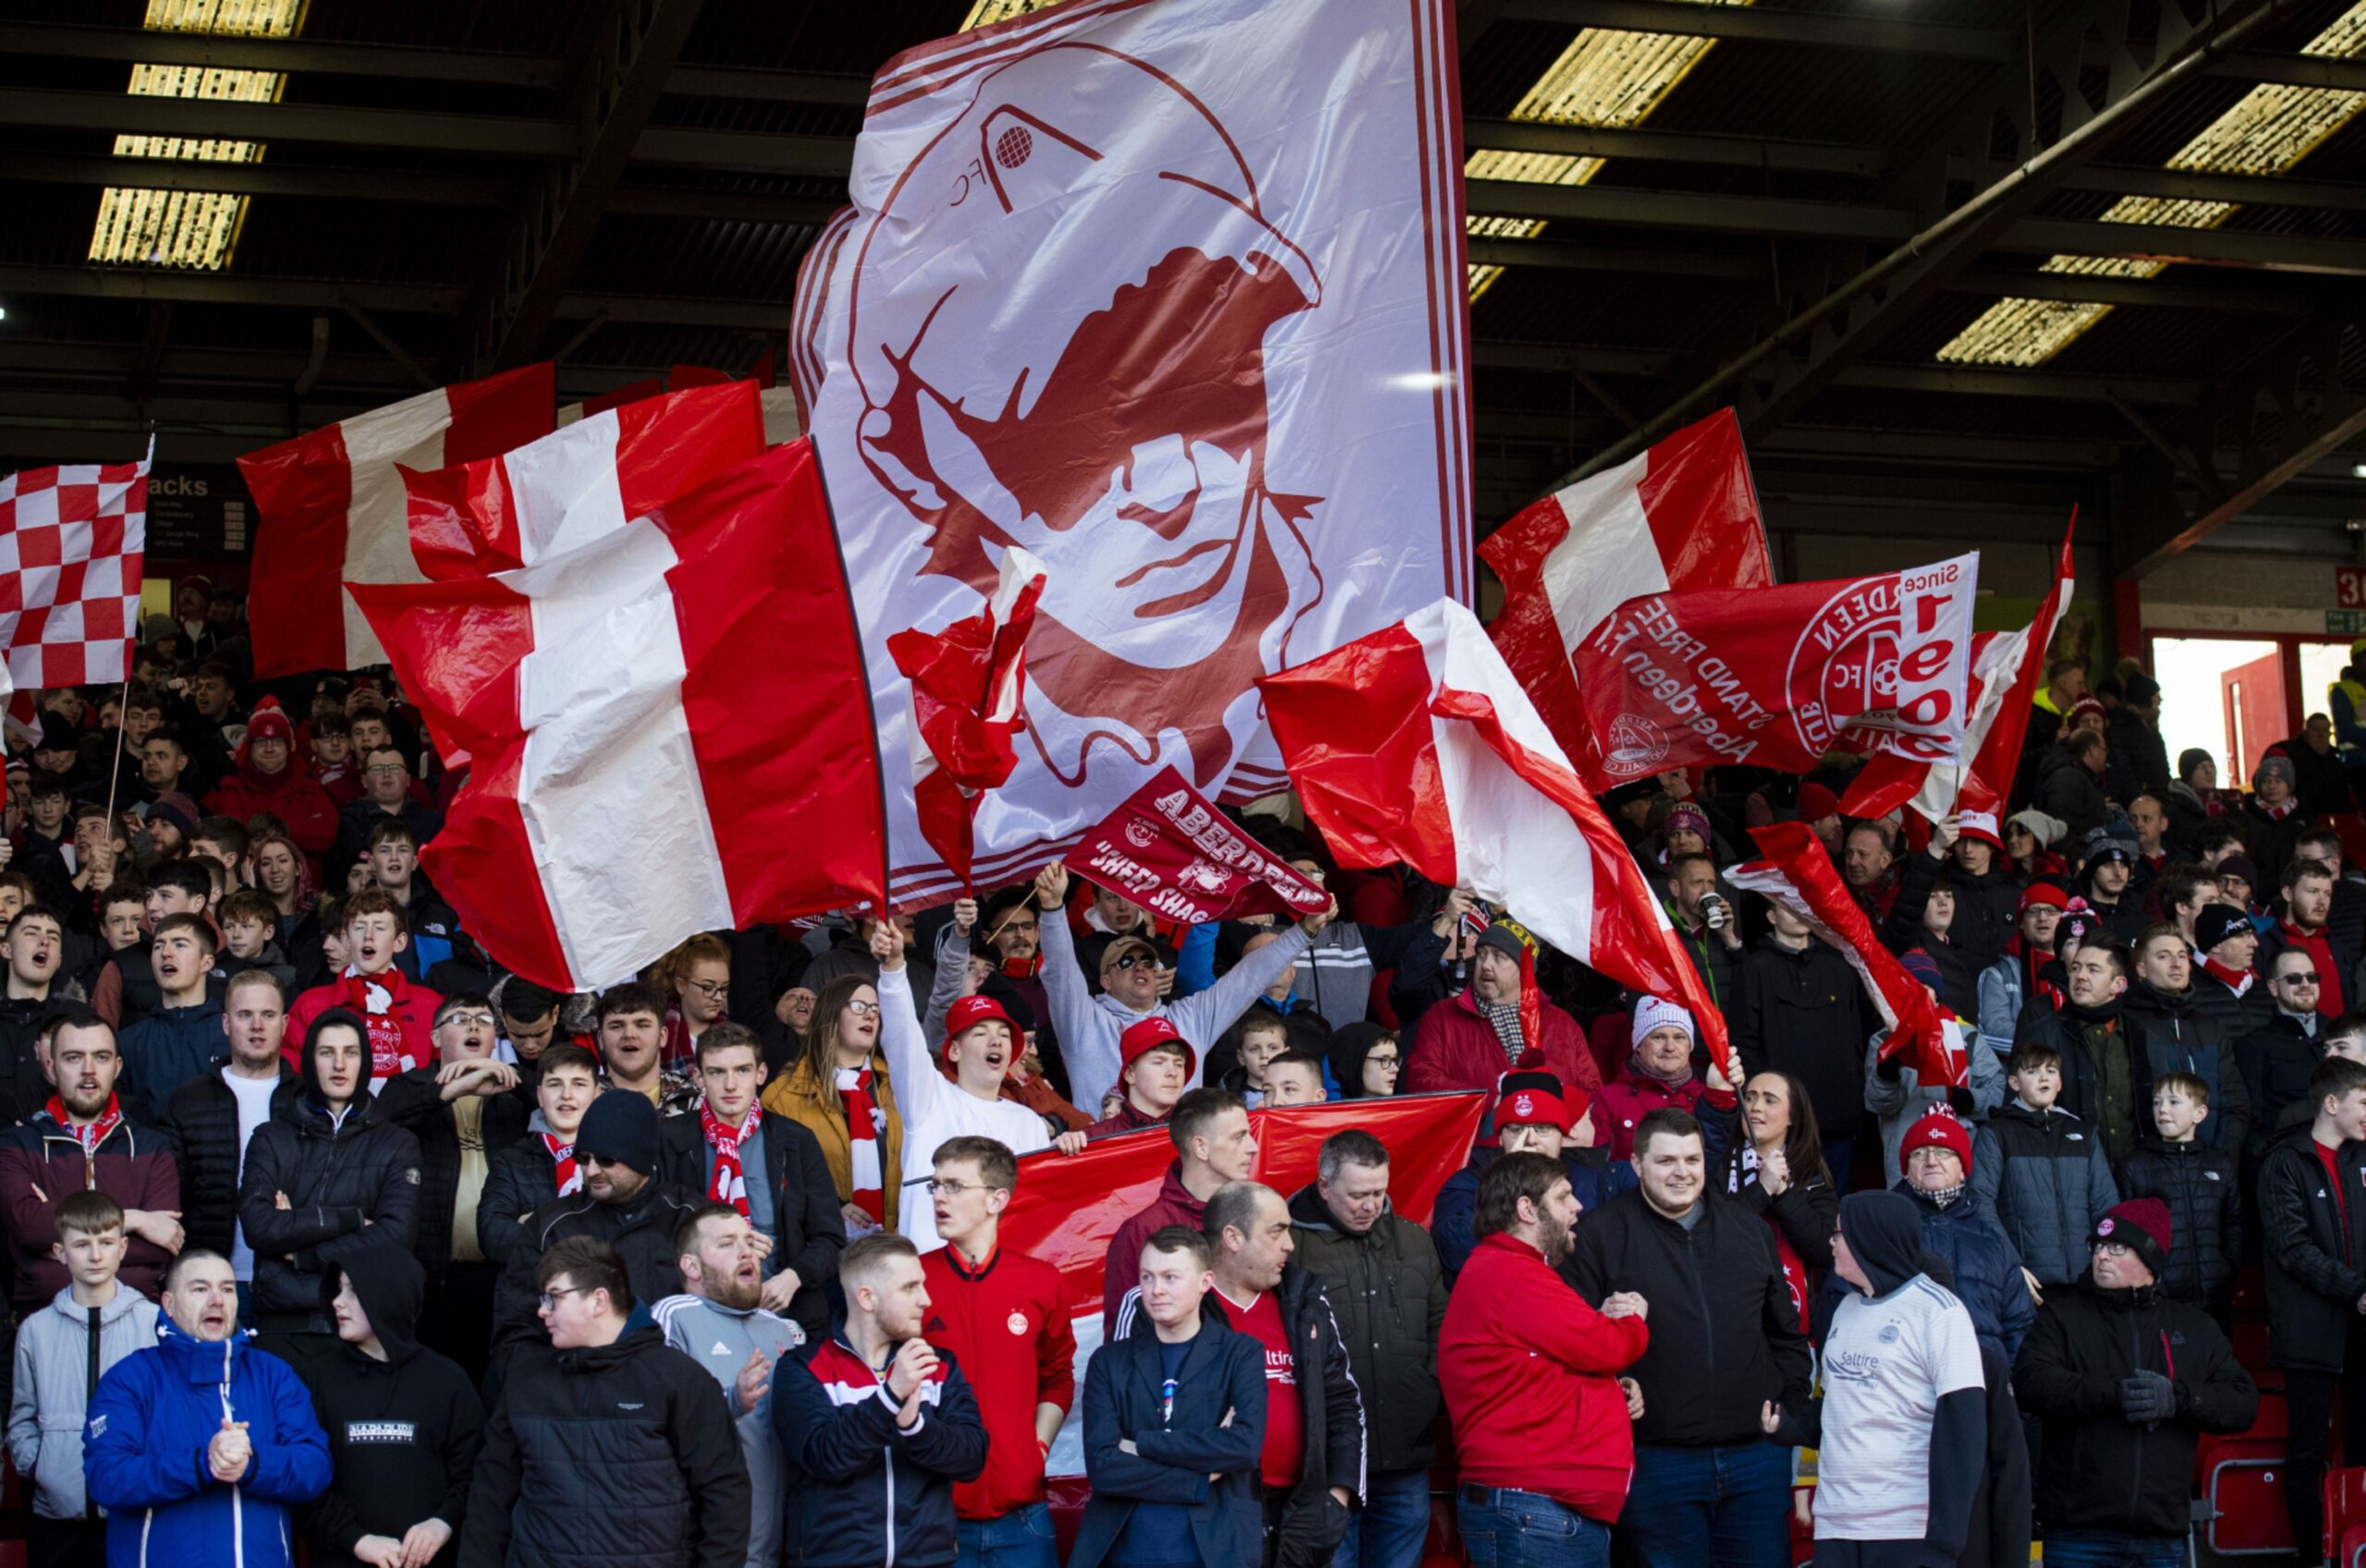 Aberdeen fans display flags ahead of kick off during the Scottish Cup 5th round tie between Aberdeen and Kilmarnock at Pittodrie Stadium on February 08, 2020. Image: SNS 